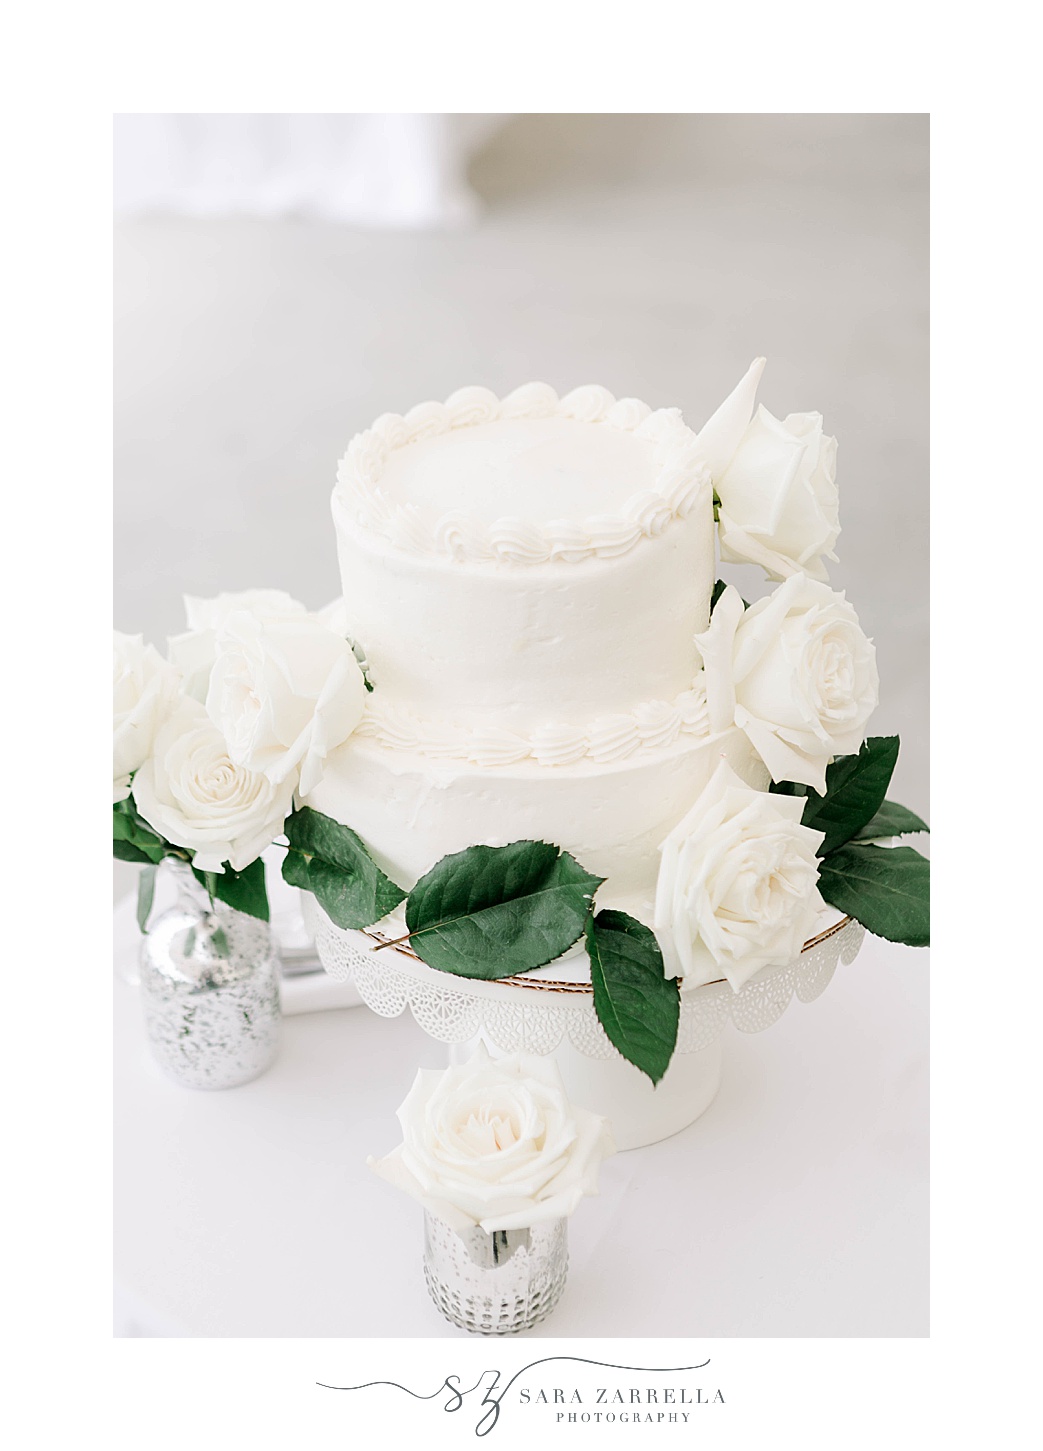 tiered wedding cake with white icing and roses 